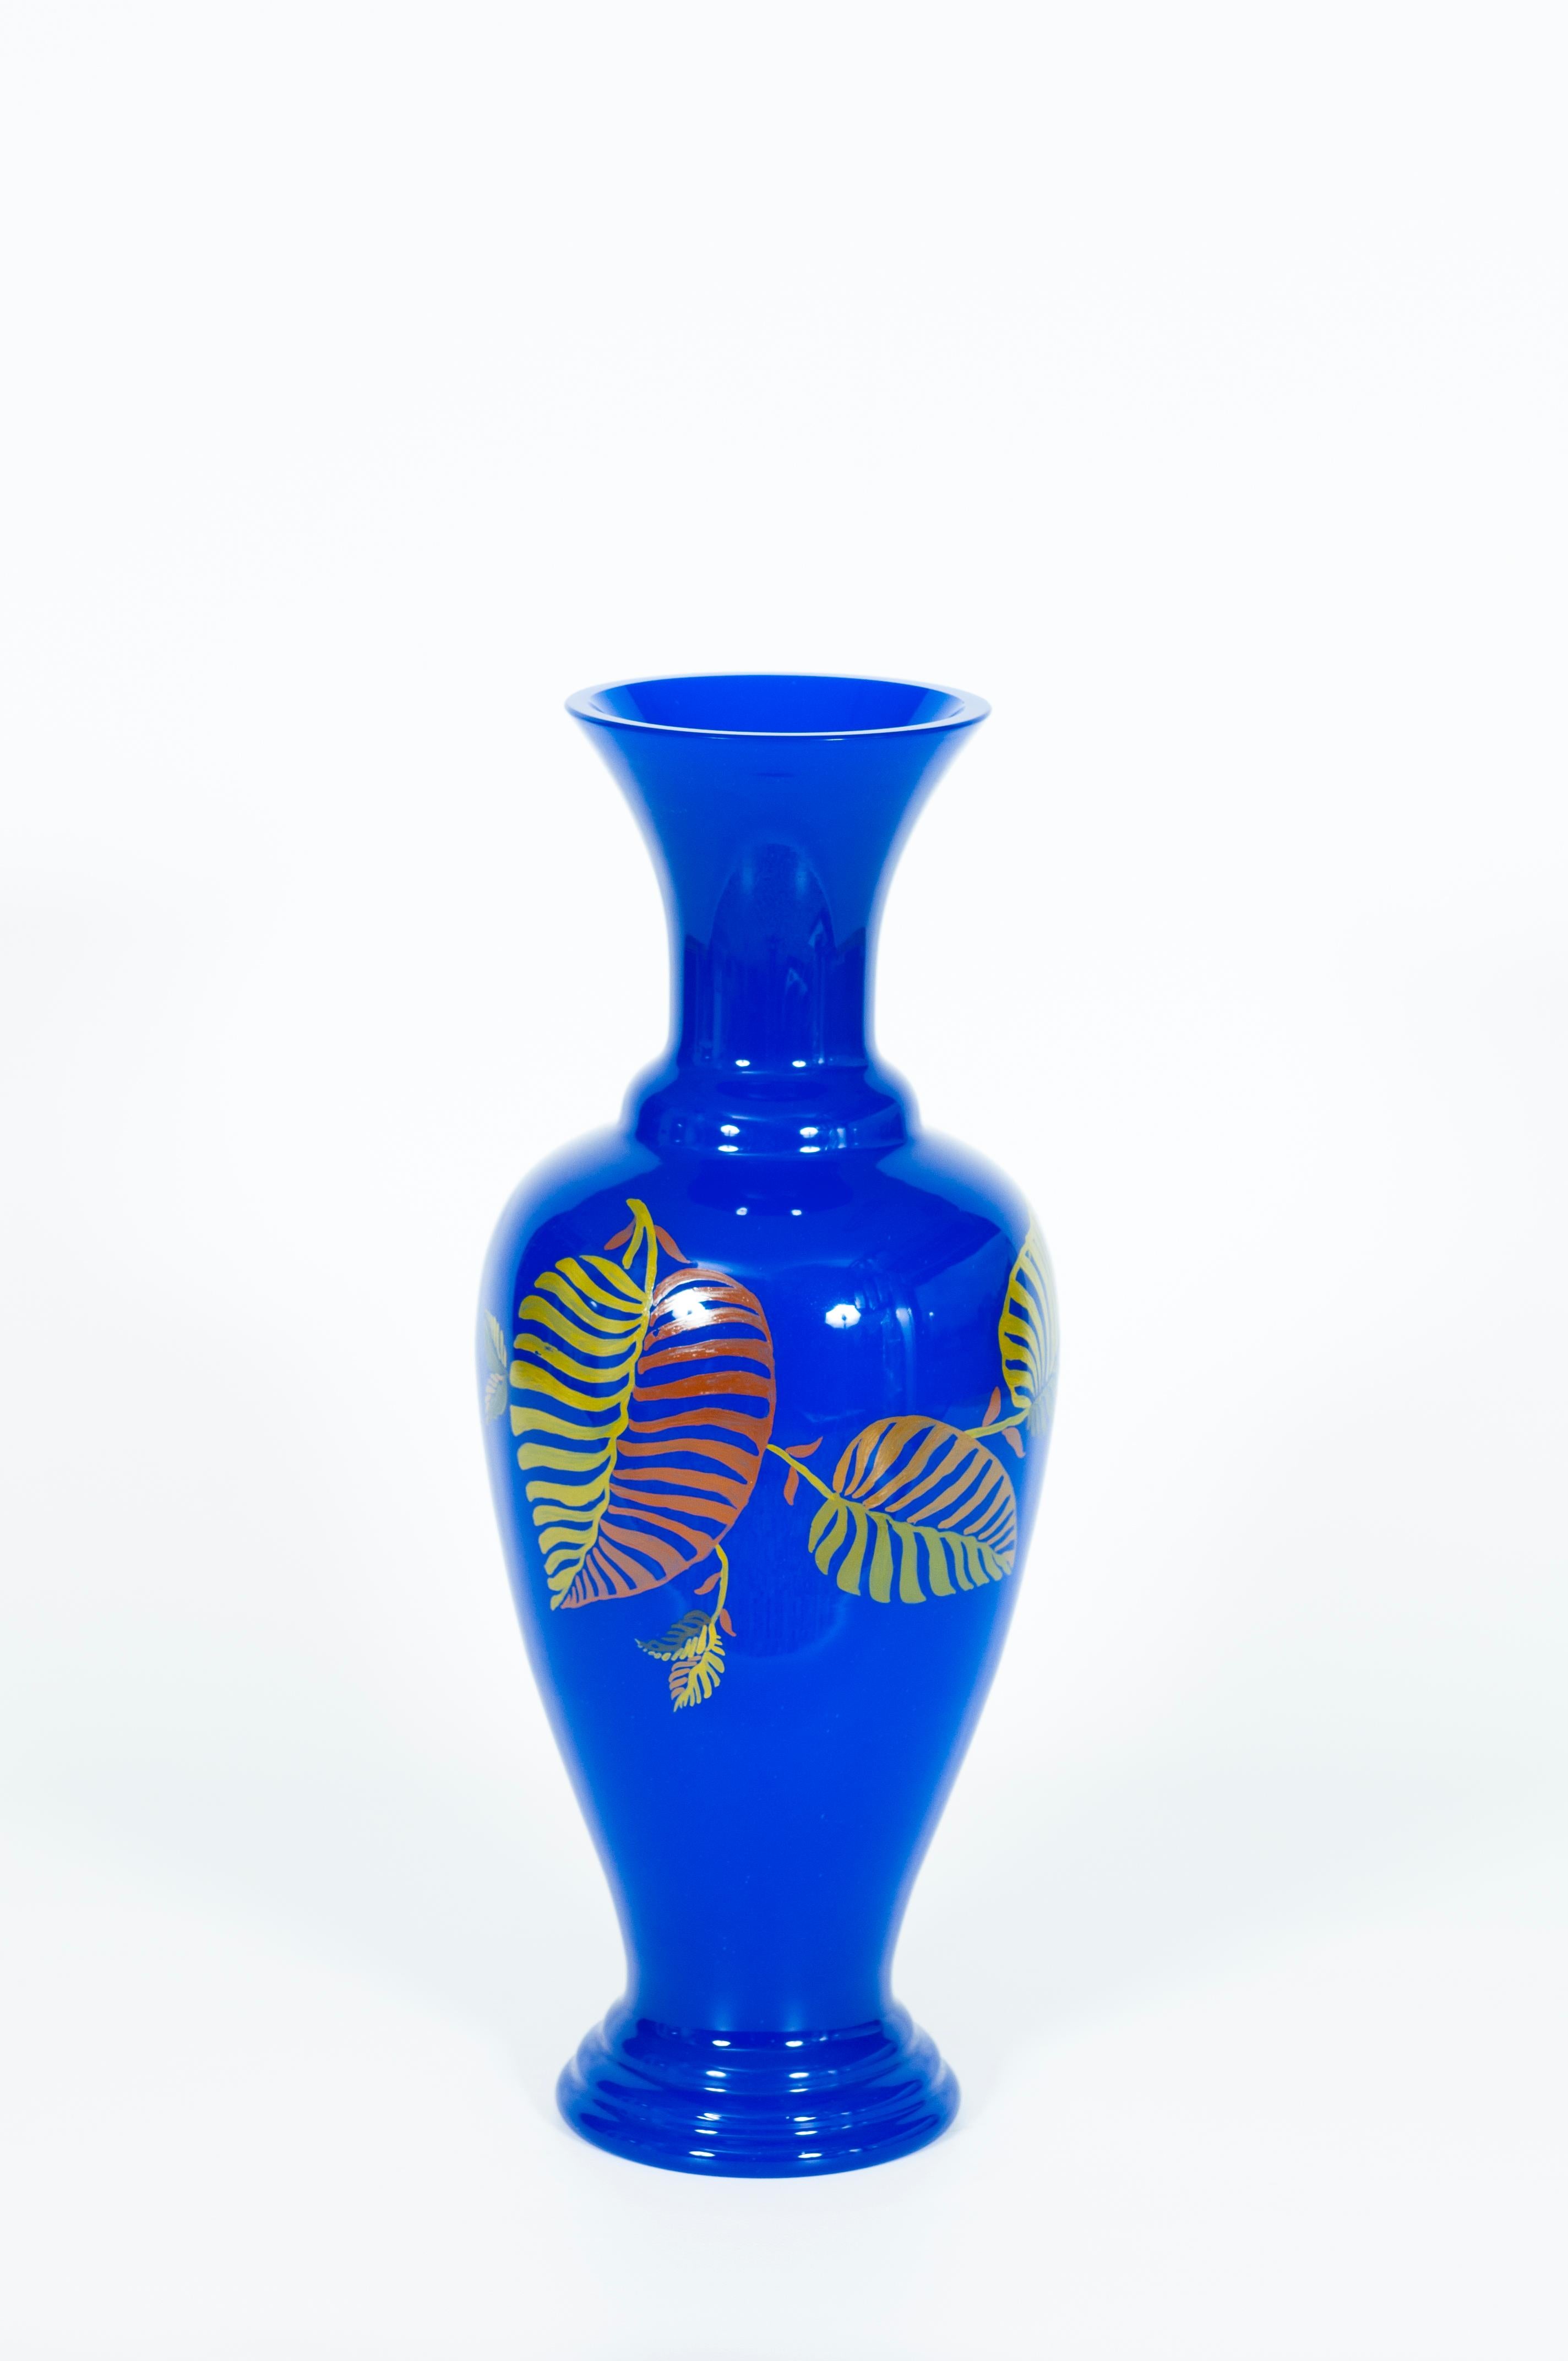 Blue Pair of Murano Glass Vases with Art Painting, Giovanni Dalla Fina, 1980s For Sale 3